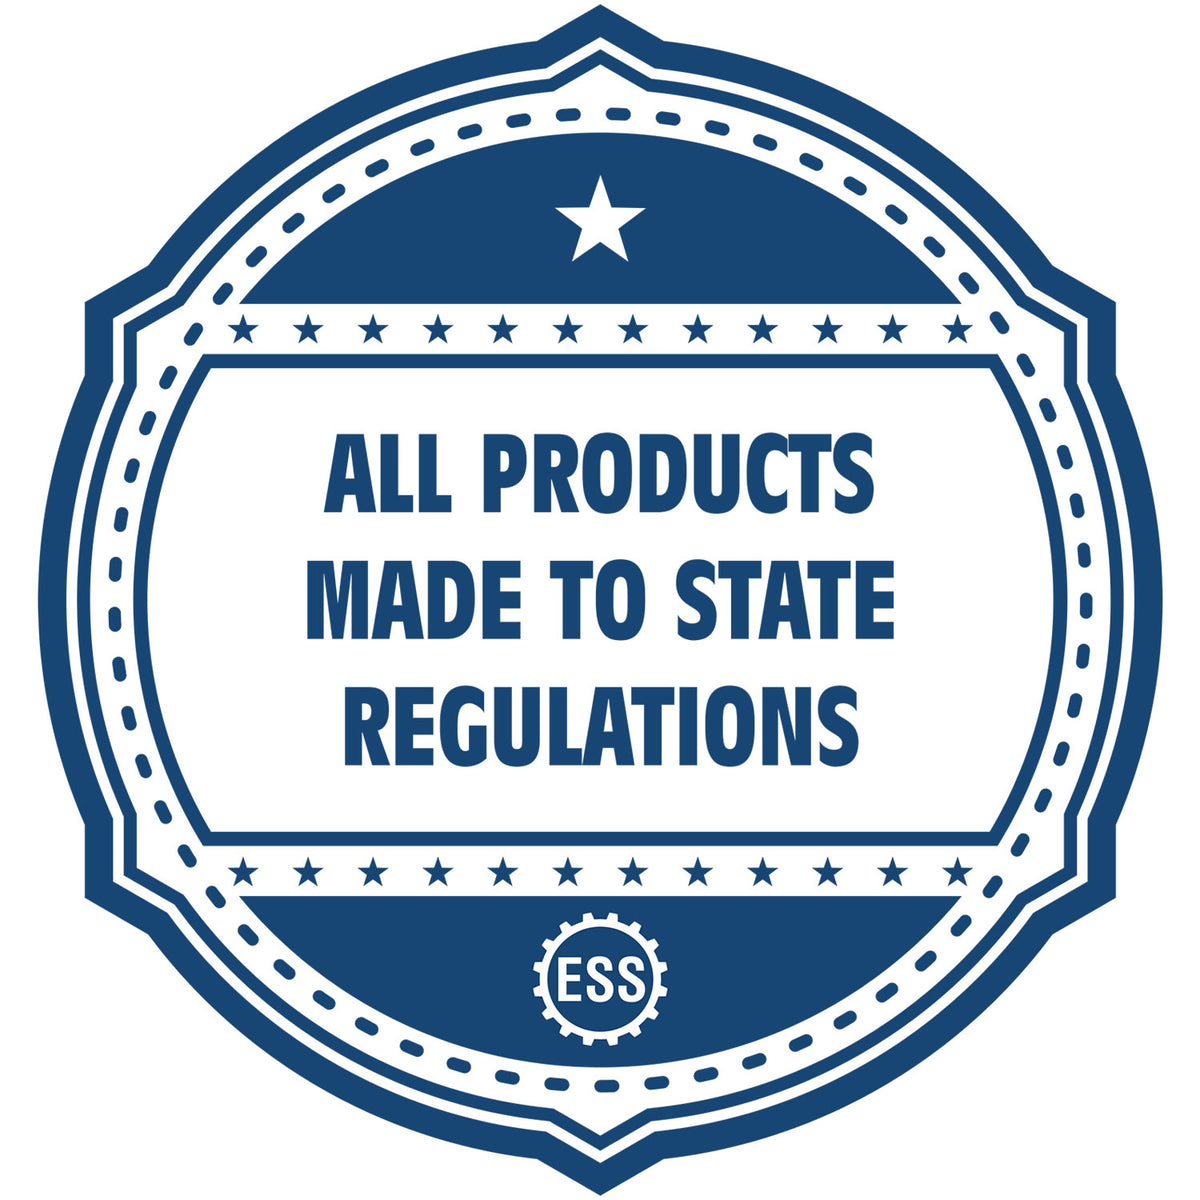 An icon or badge element for the Heavy Duty Cast Iron New Hampshire Engineer Seal Embosser showing that this product is made in compliance with state regulations.